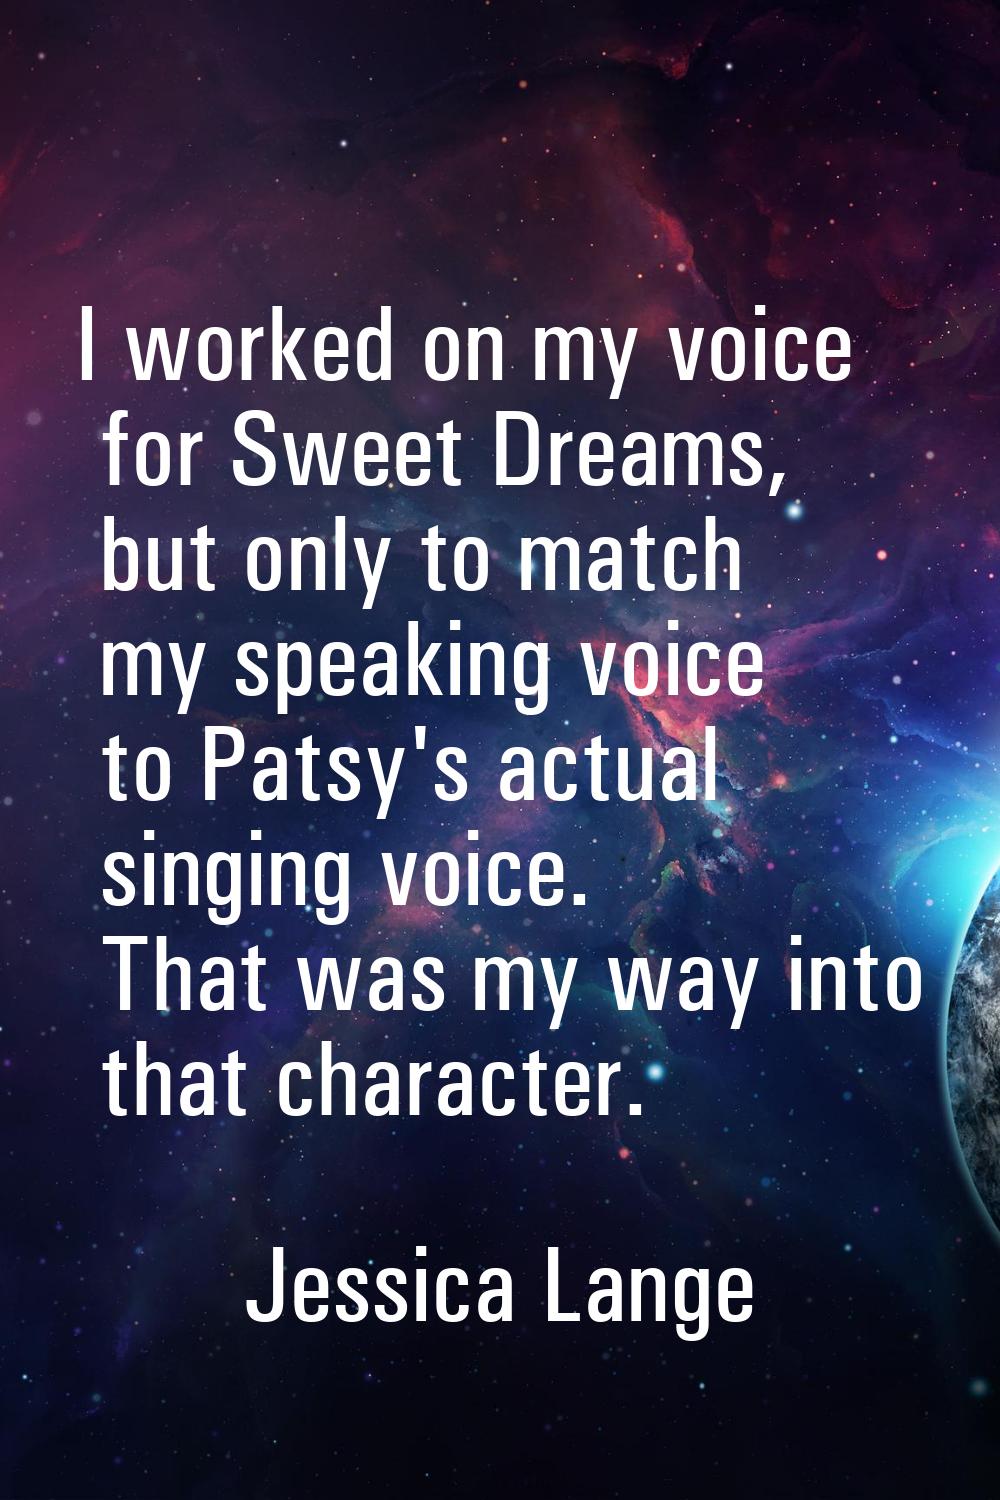 I worked on my voice for Sweet Dreams, but only to match my speaking voice to Patsy's actual singin